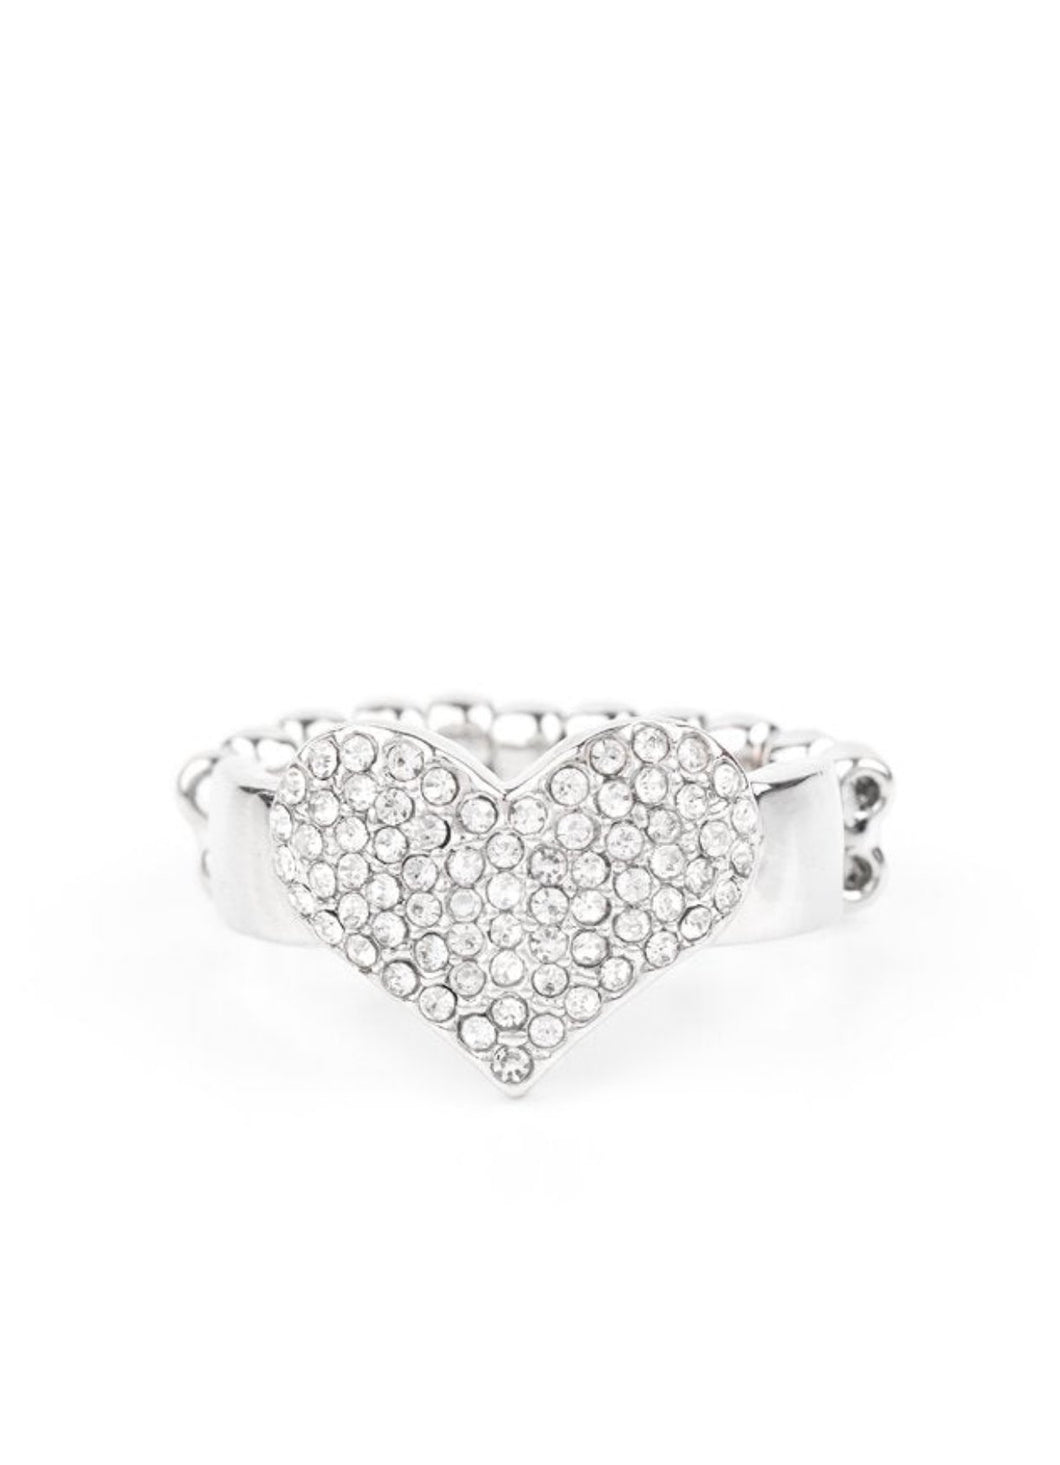 Heart of BLING Silver and Bling Ring